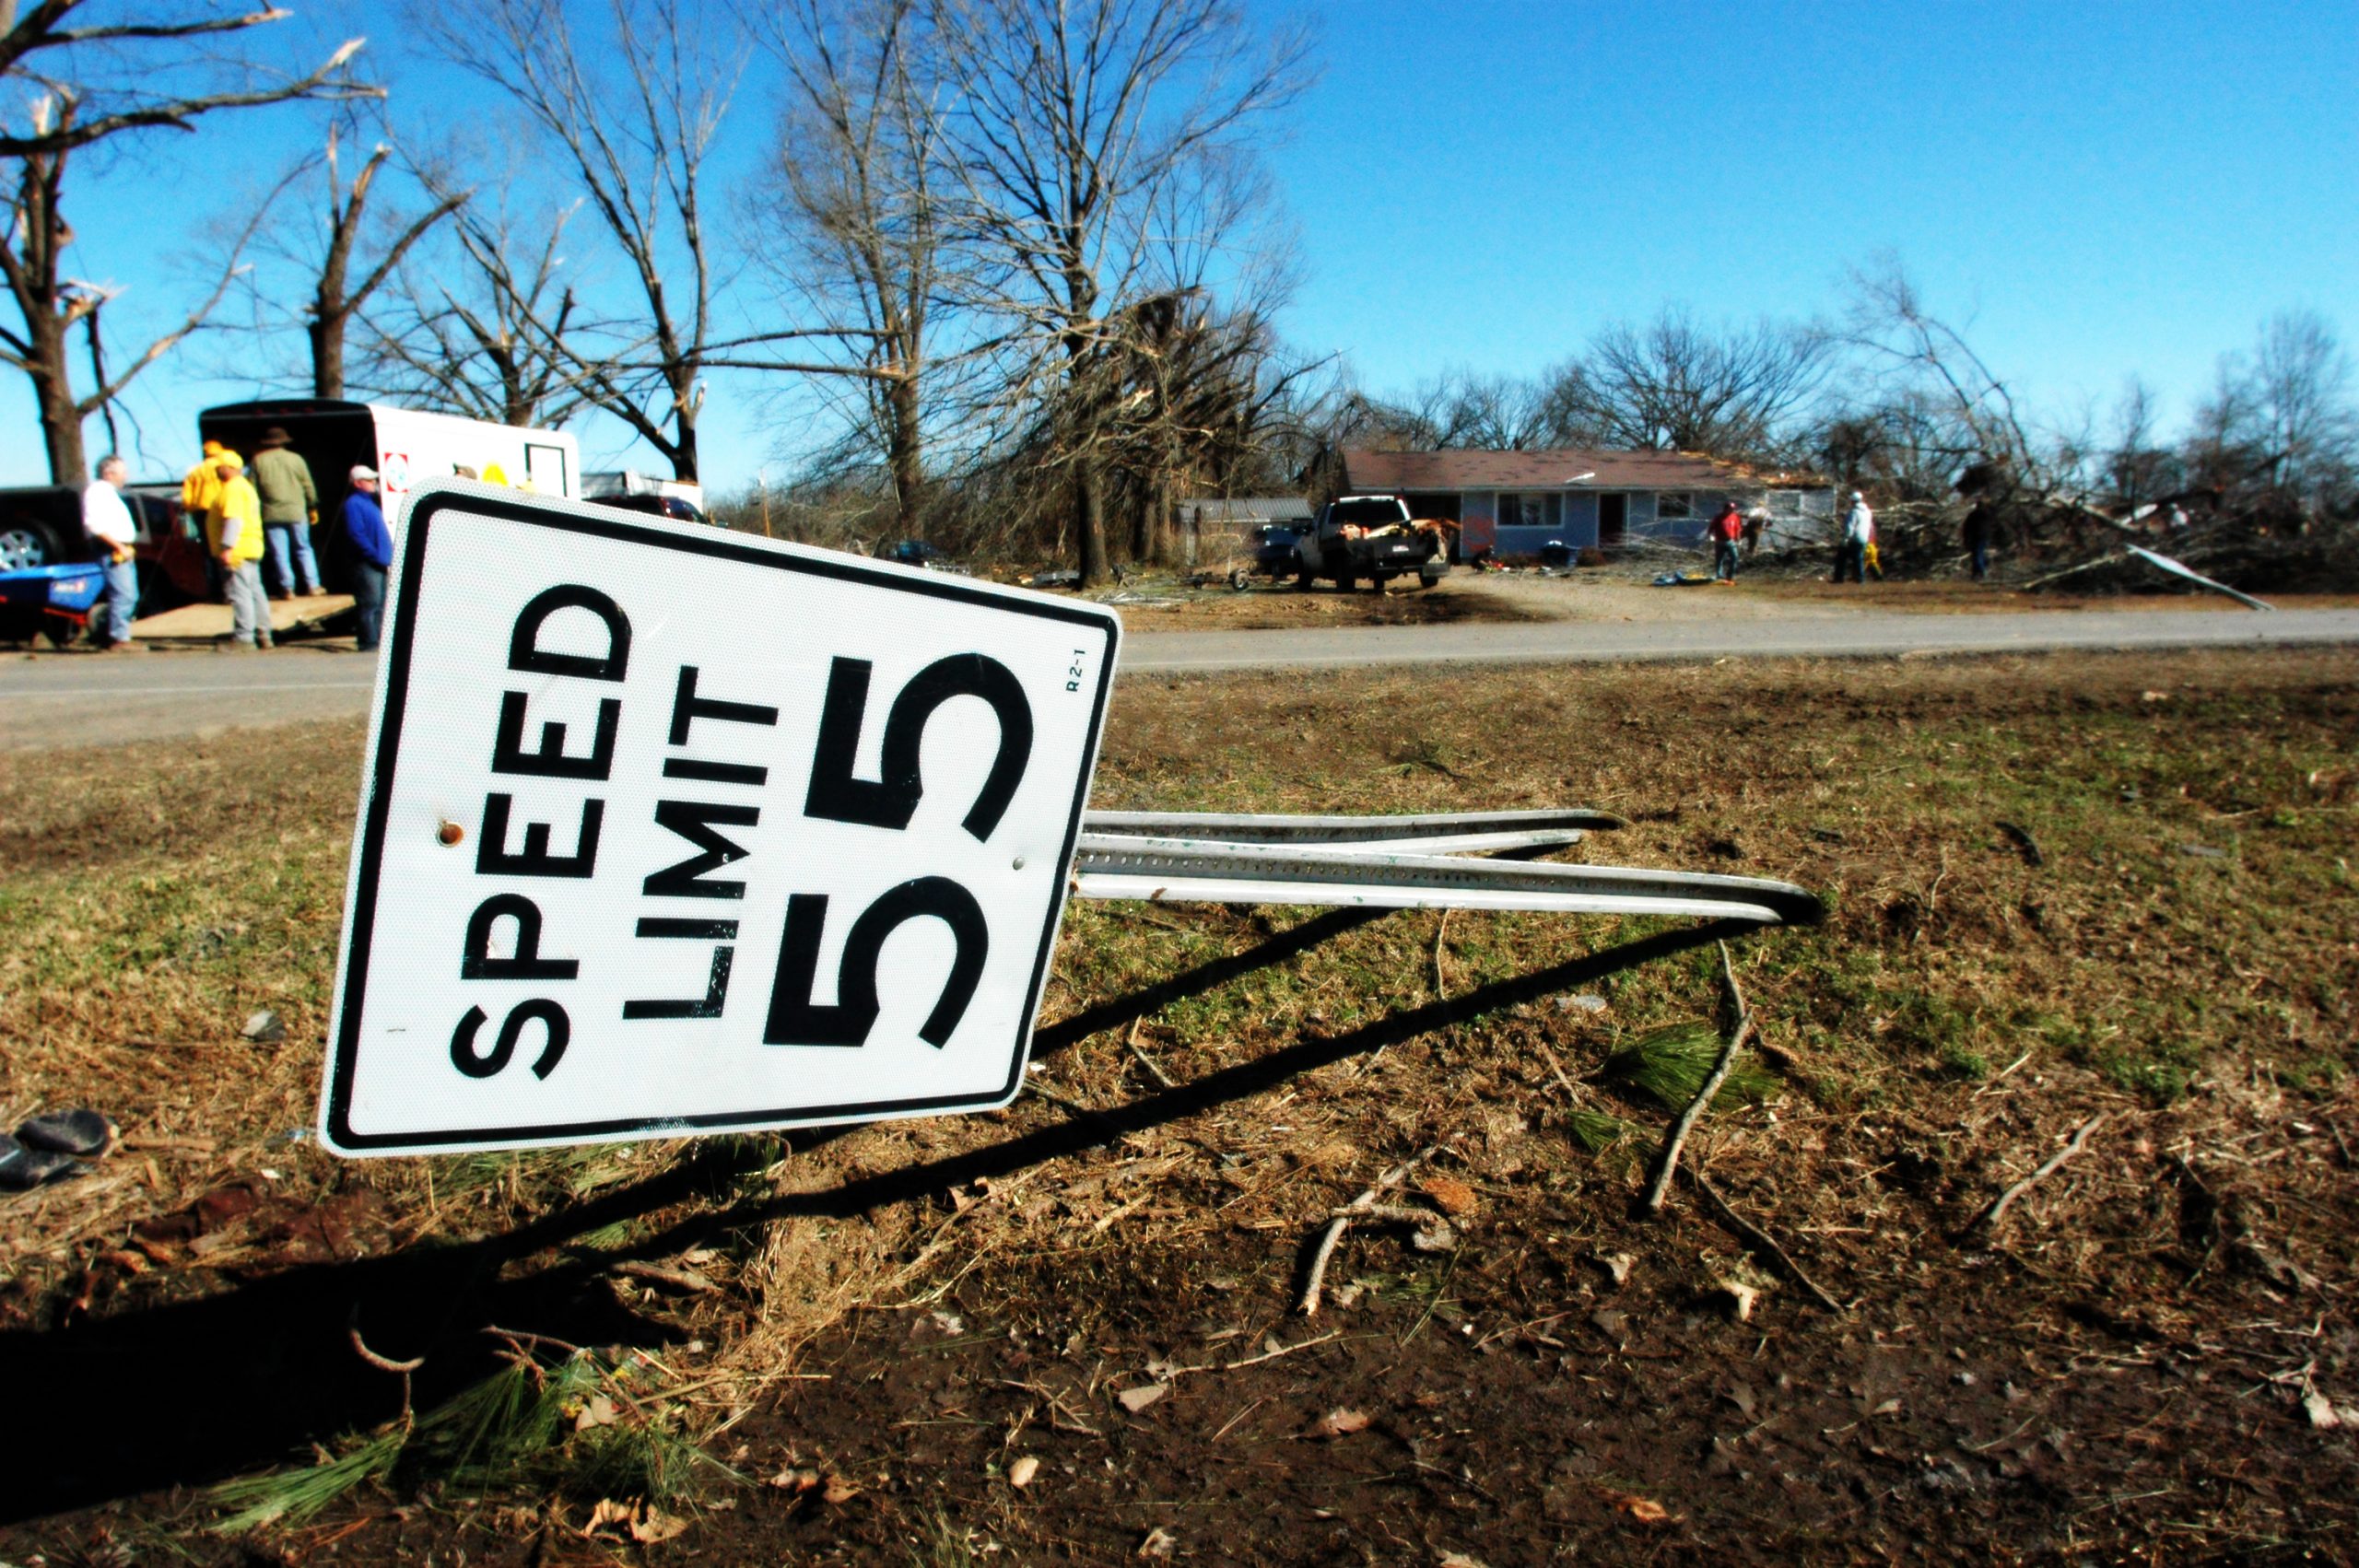 February 8, 2008, Polk County, AR -- Highway sign bent by tornado which swept the state. Church volunteers in the bacground attempt to salvage valuables from house which was destroyed. The Federal Emergency Managment Agency (FEMA) works closely with volunteer agencies to provide much needed help in the immediate aftermath of a disaster. Leif Skoogfors/FEMA